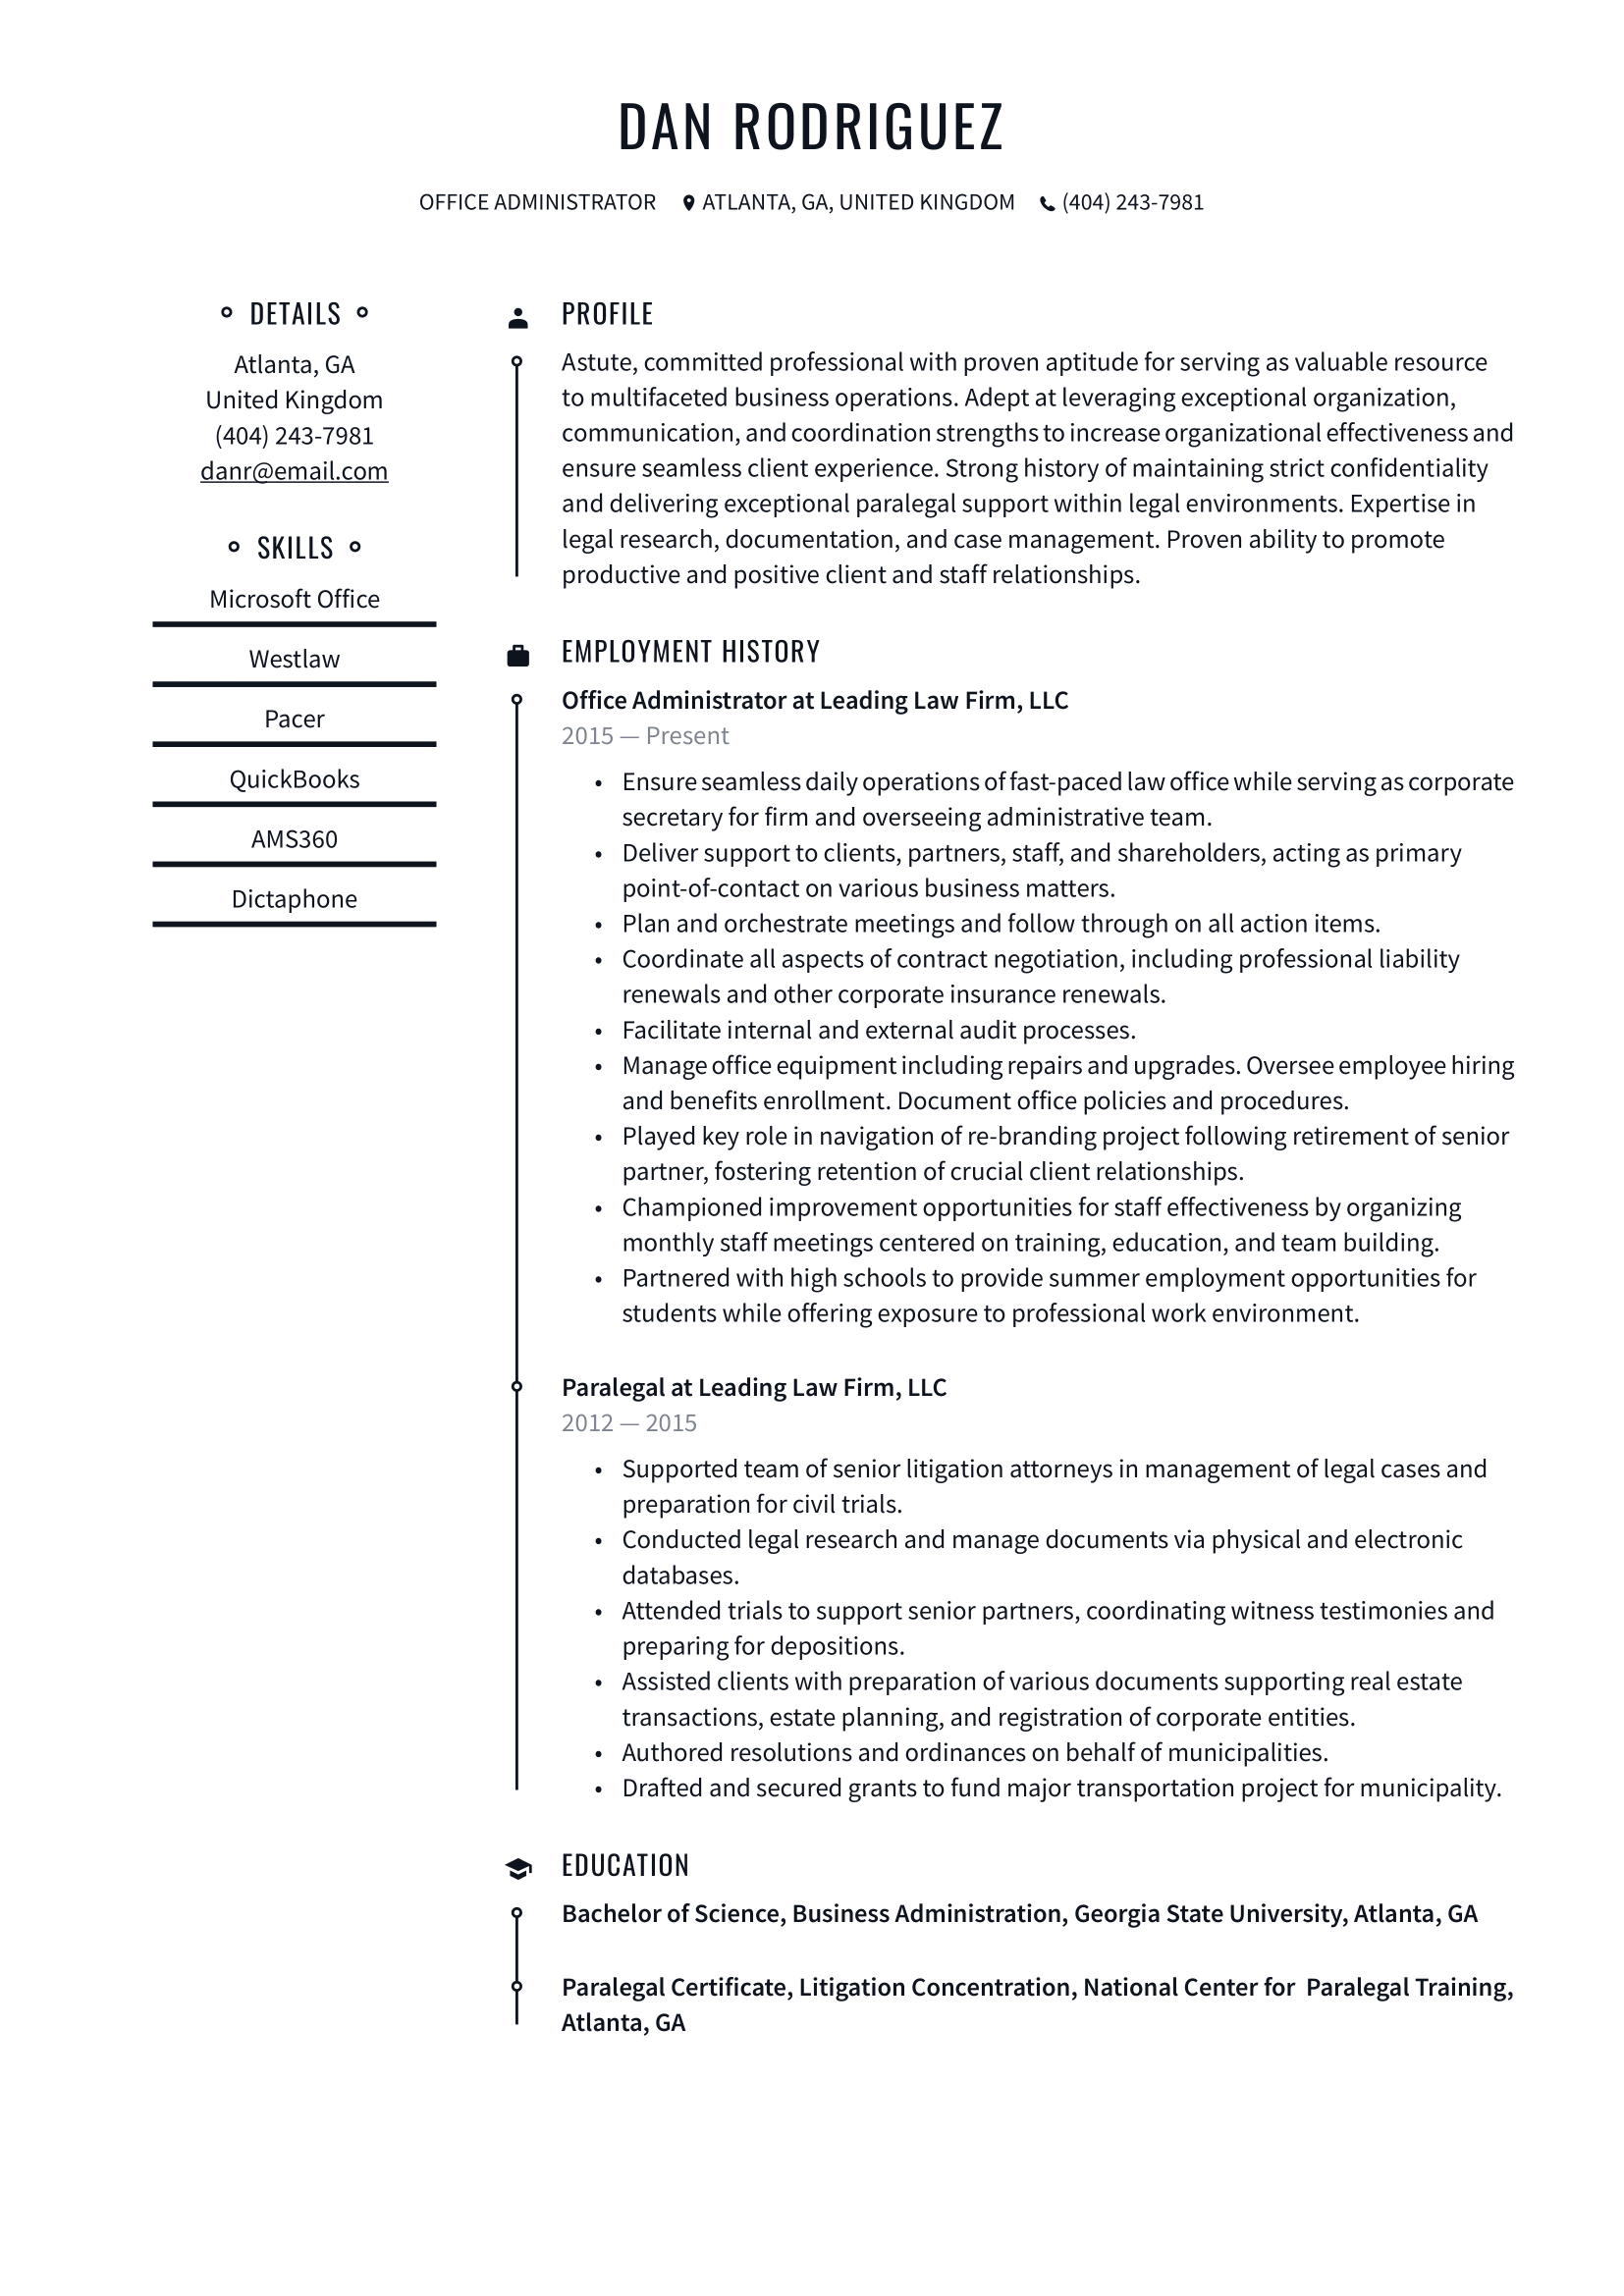 Office Administrator Resume Example & Writing Guide